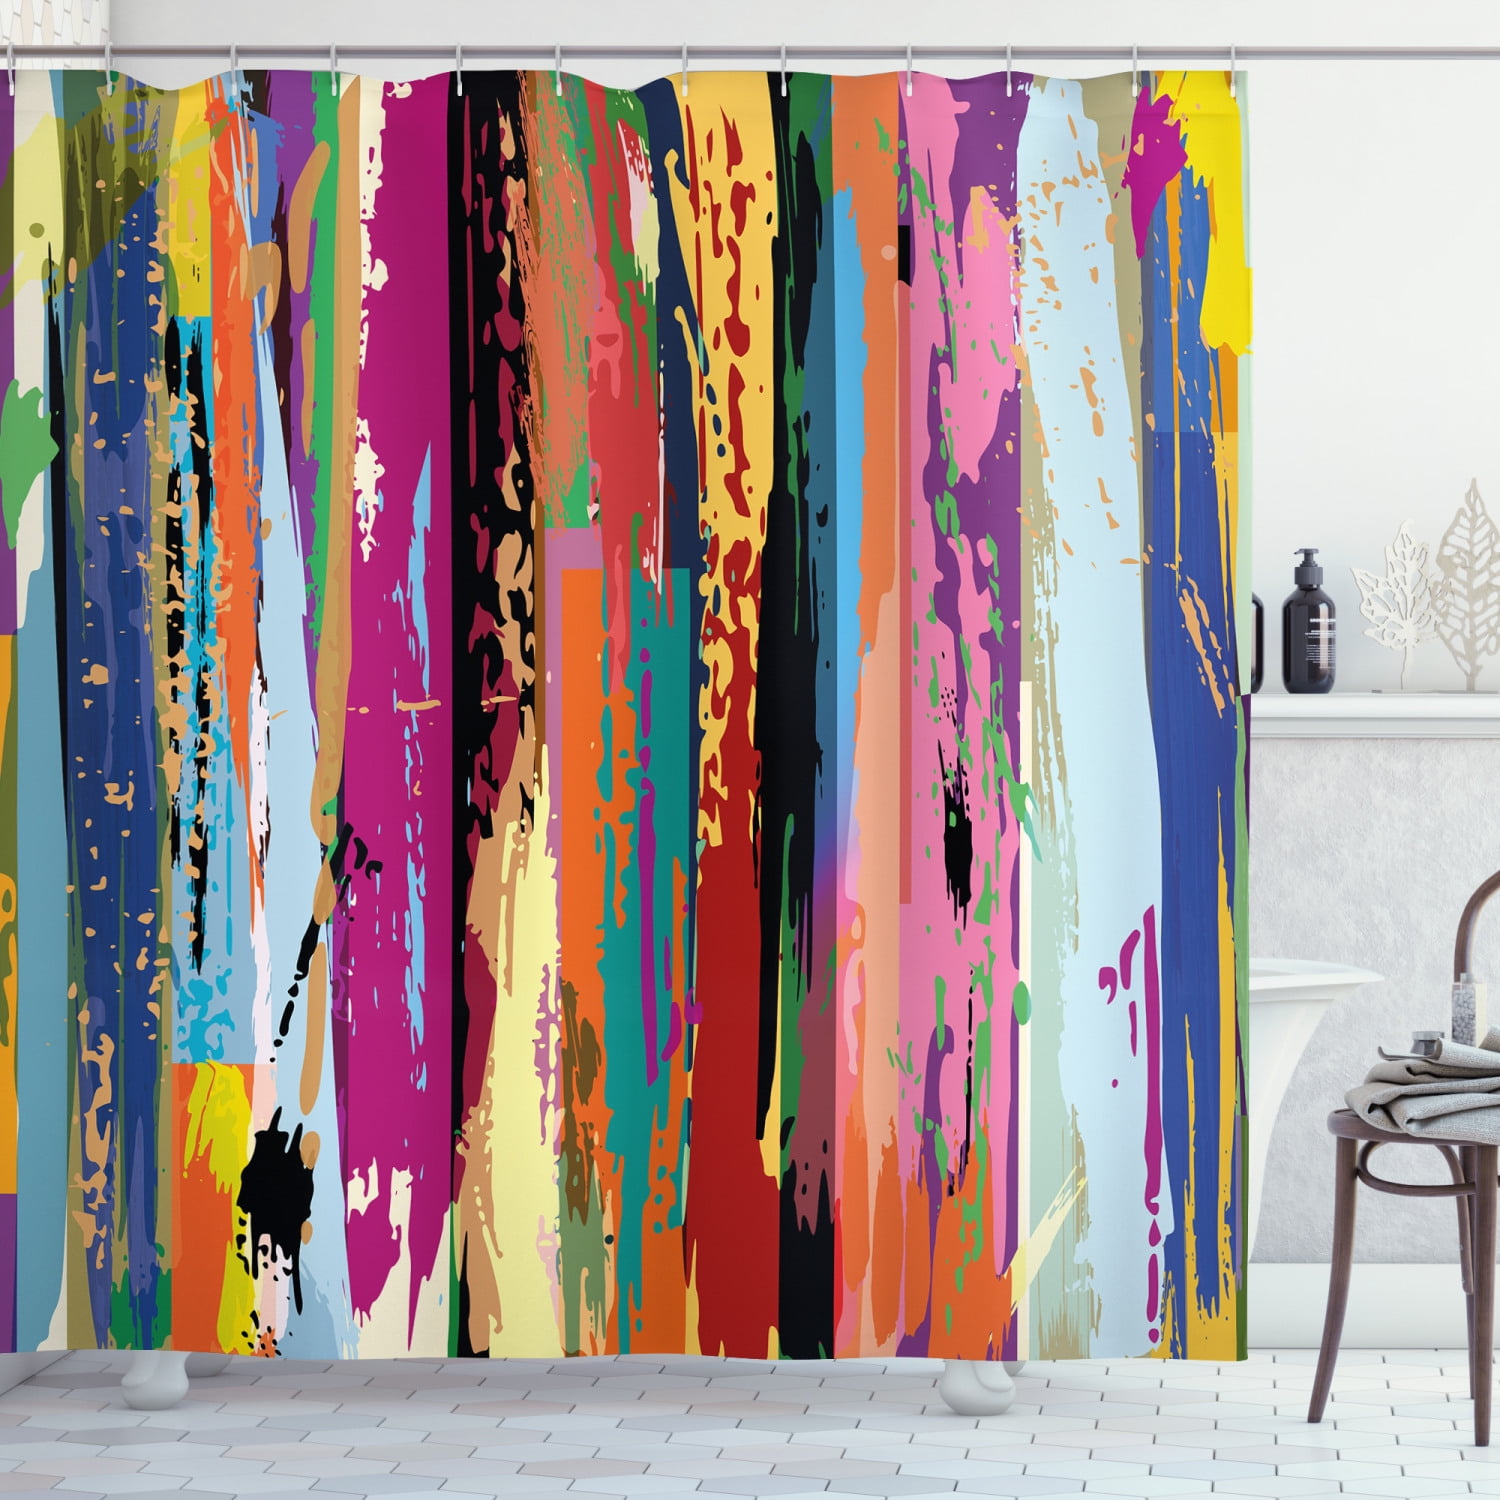 Details about   Abstract Blurred Painting Nature Shower Curtain BathroomPolyester Fabric 71inch 